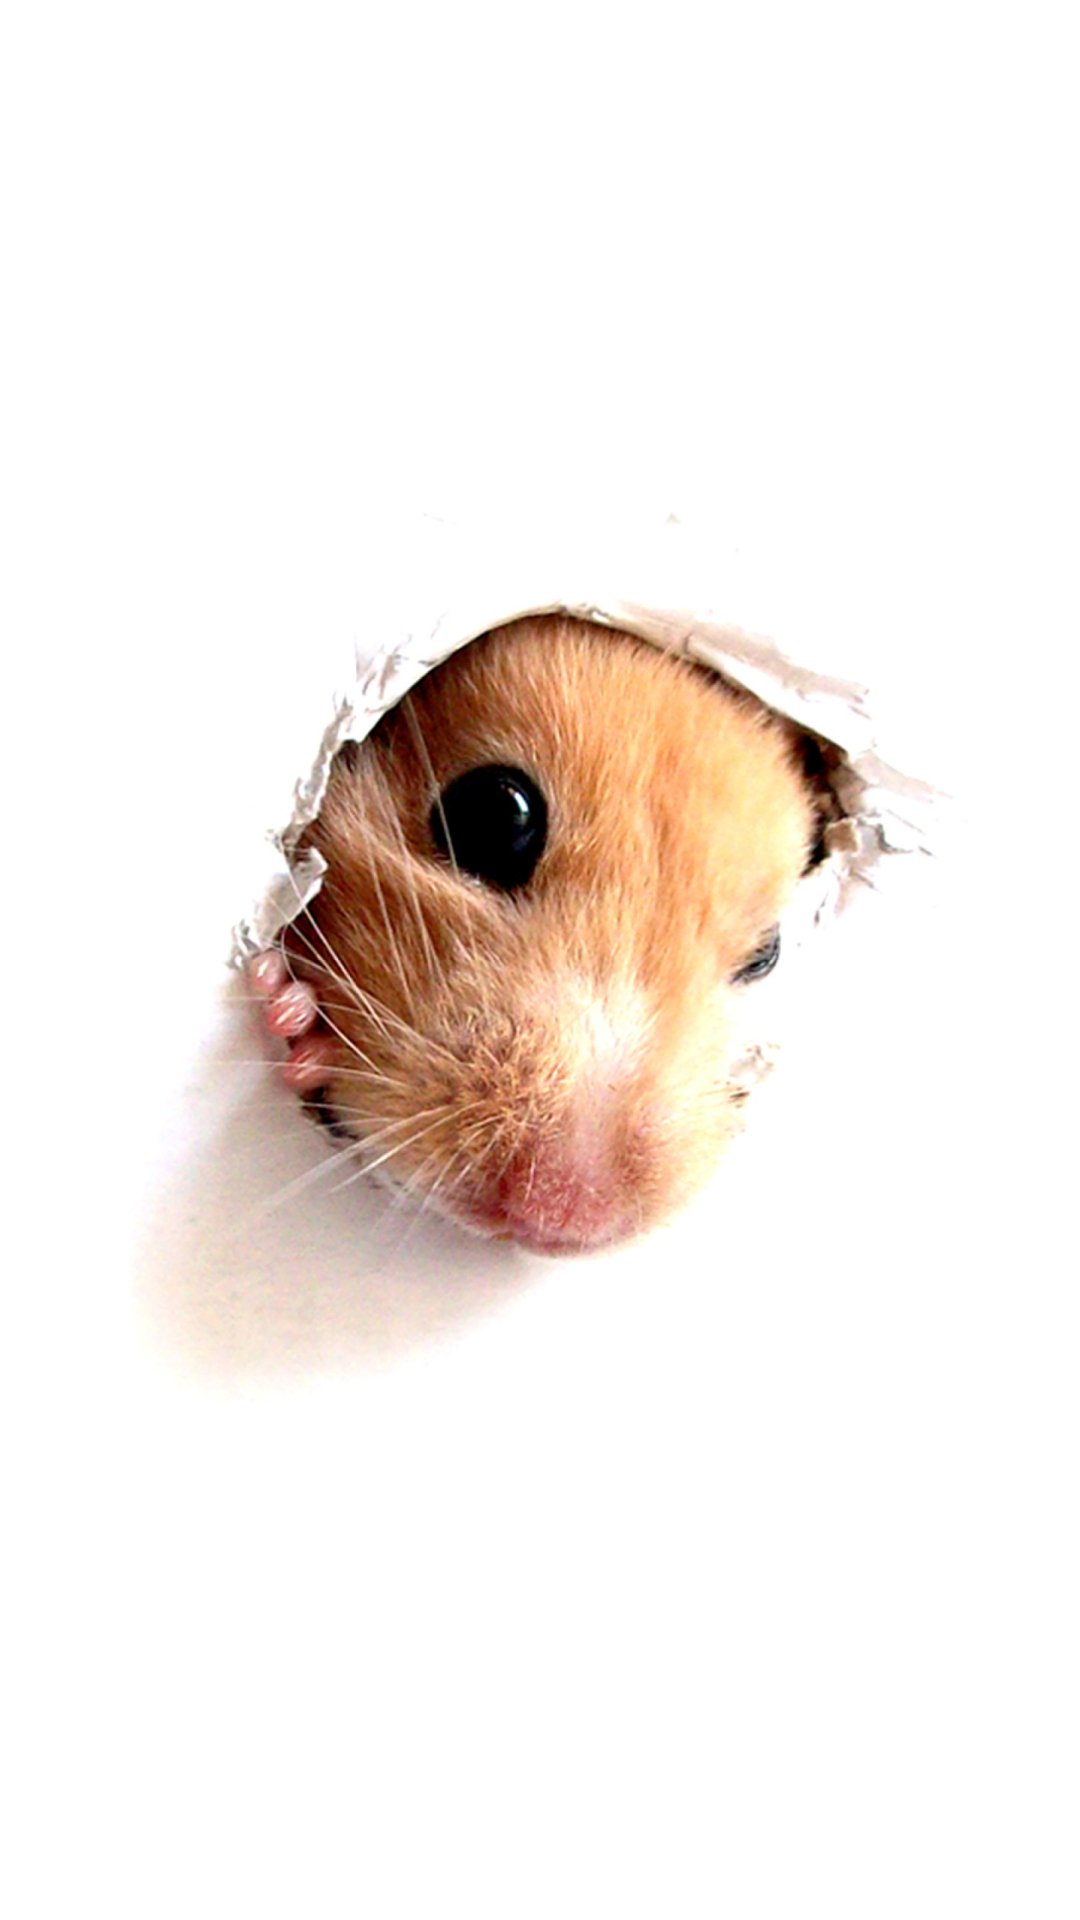 Hamster In Hole On Your Screen screenshot #1 1080x1920